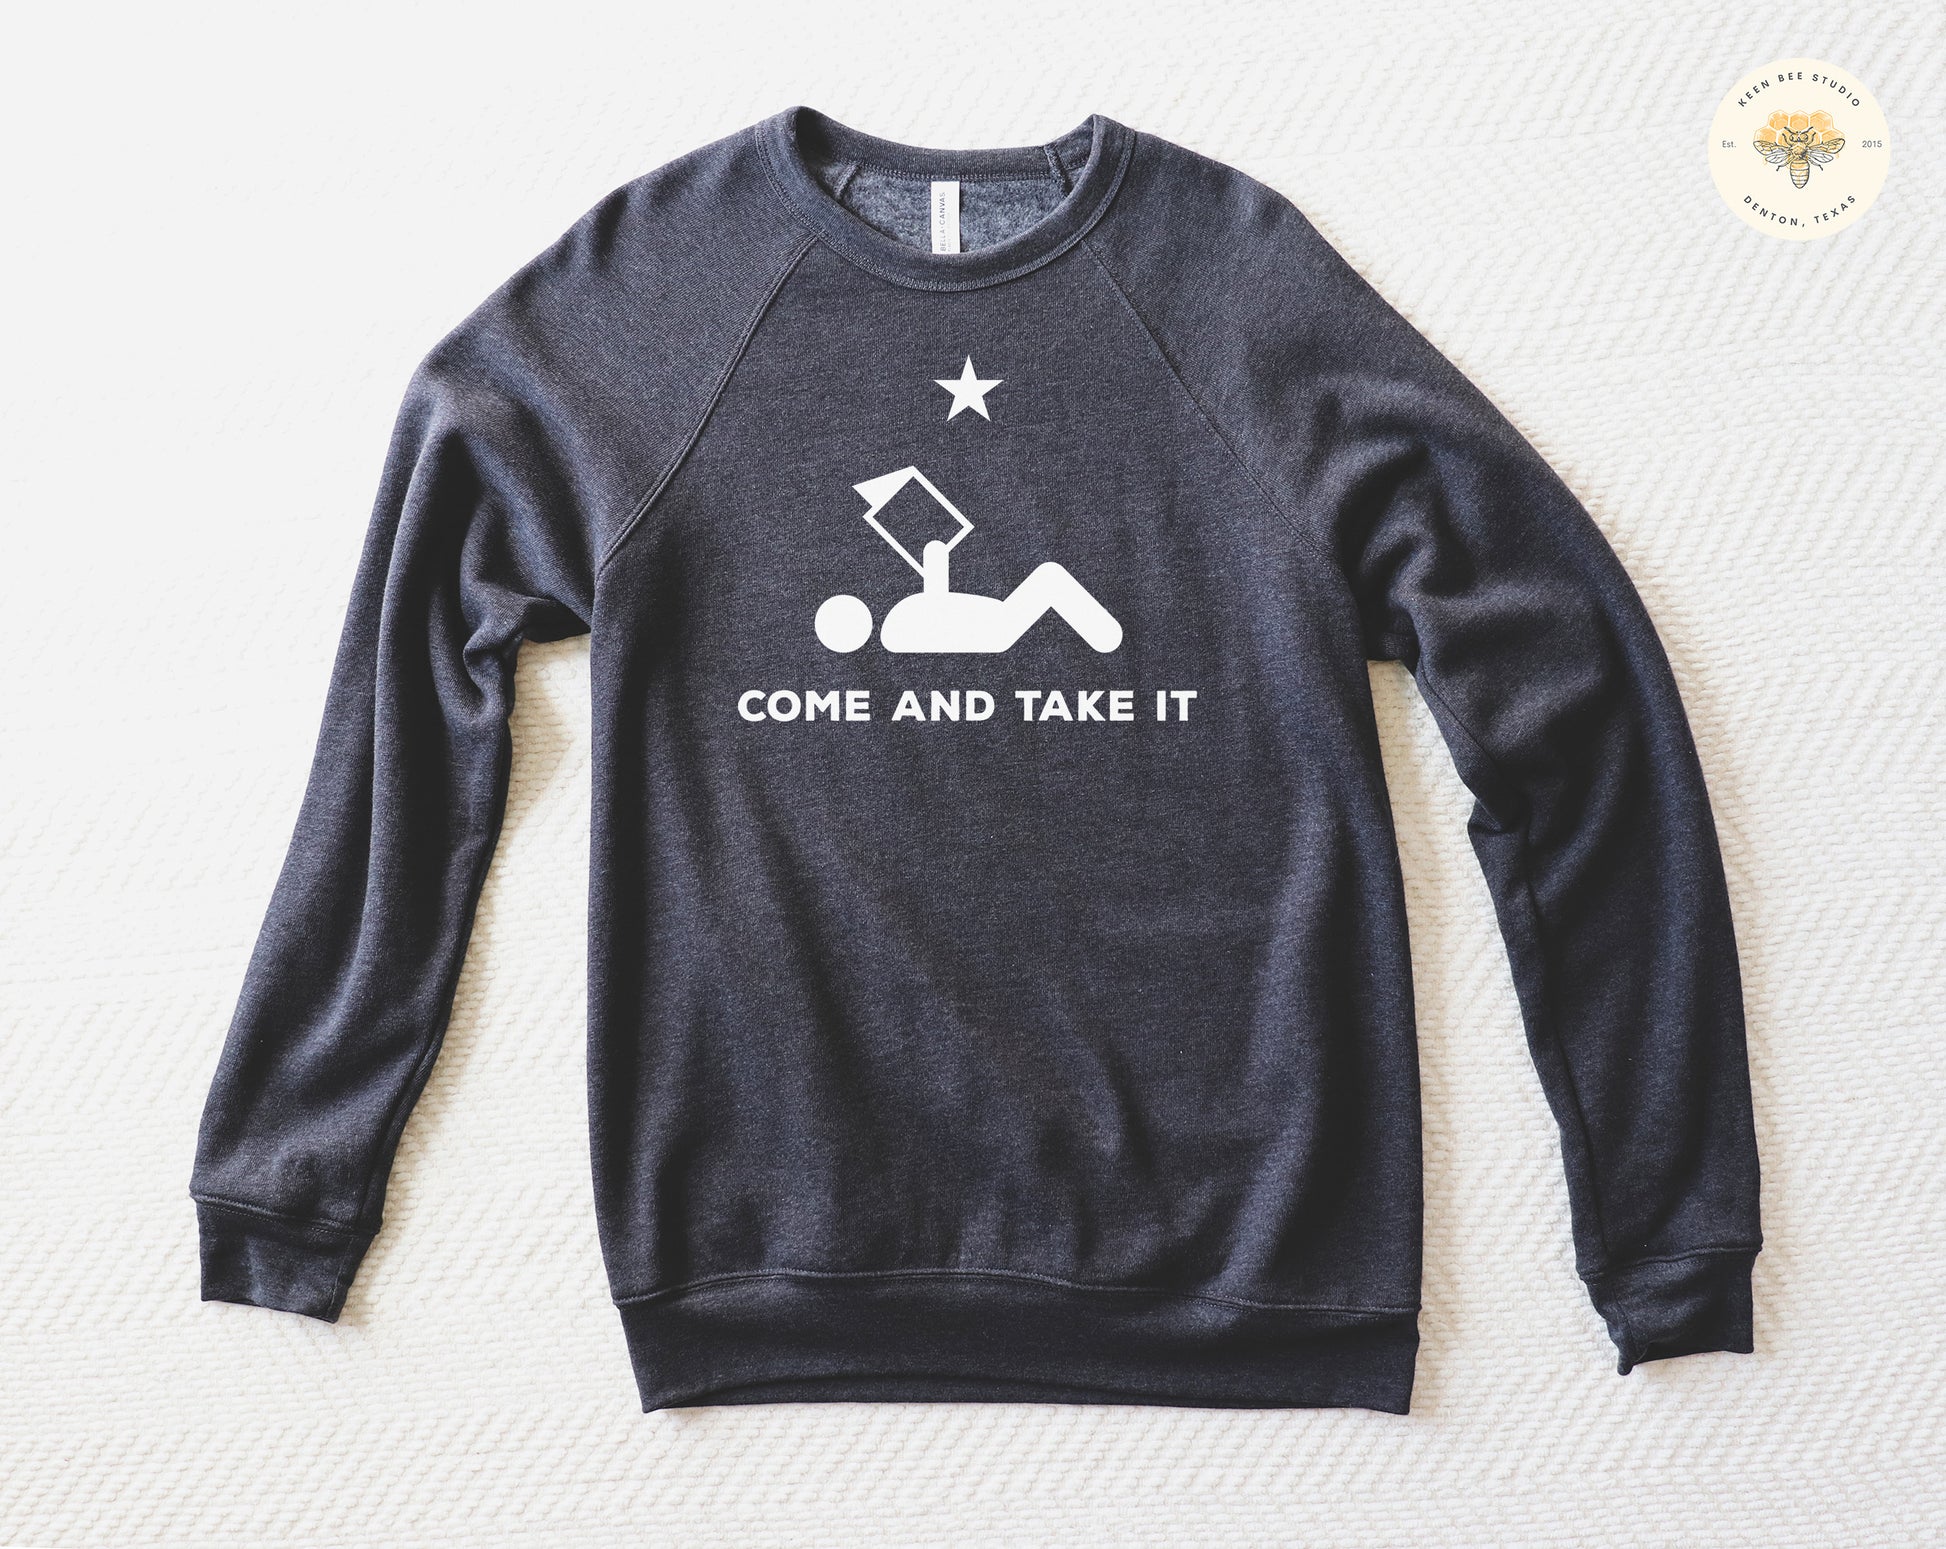 Banned Books Librarian Sweatshirt - Come and Take it Premium Material, Empowering Design